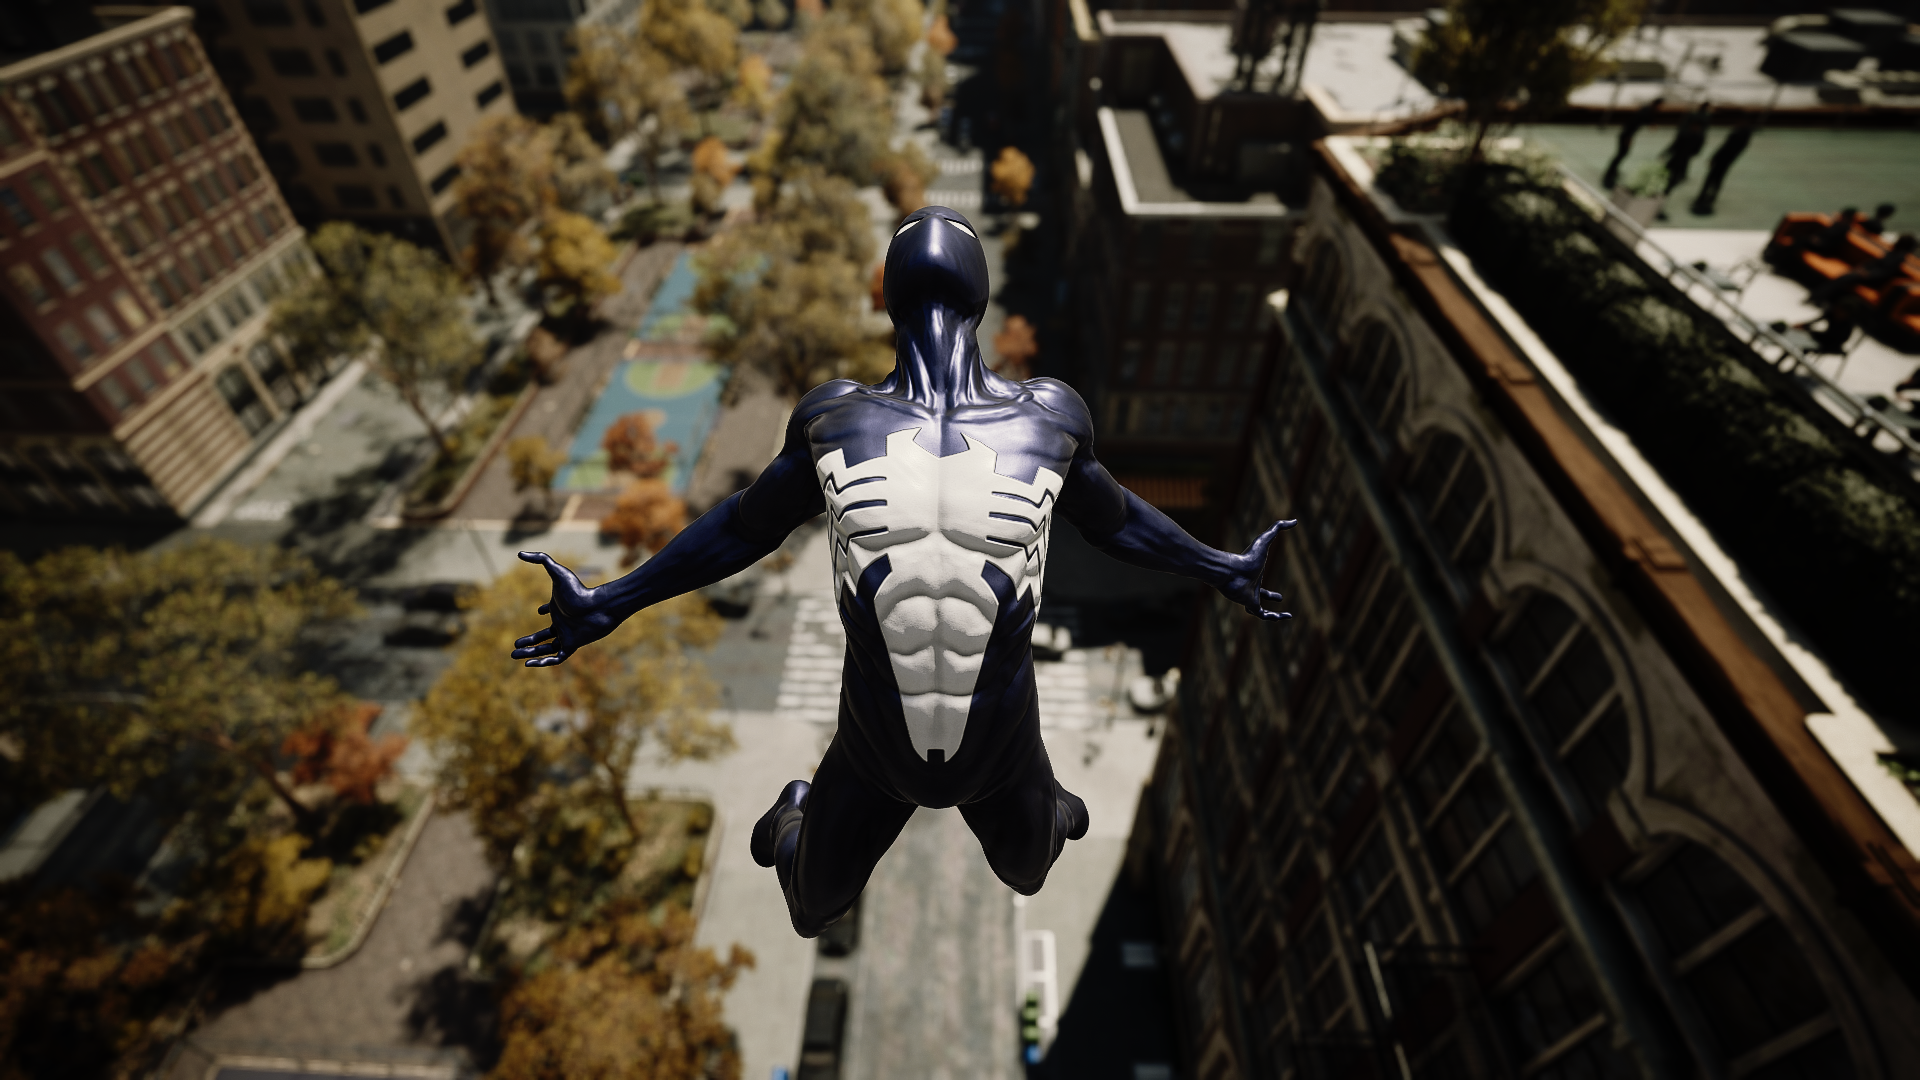 General 1920x1080 Spider-Man Remastered city Insomniac Games superhero Marvel Comics video games trees New York City bodysuit video game art screen shot video game characters CGI Amazing Spider-Man black building architecture abs